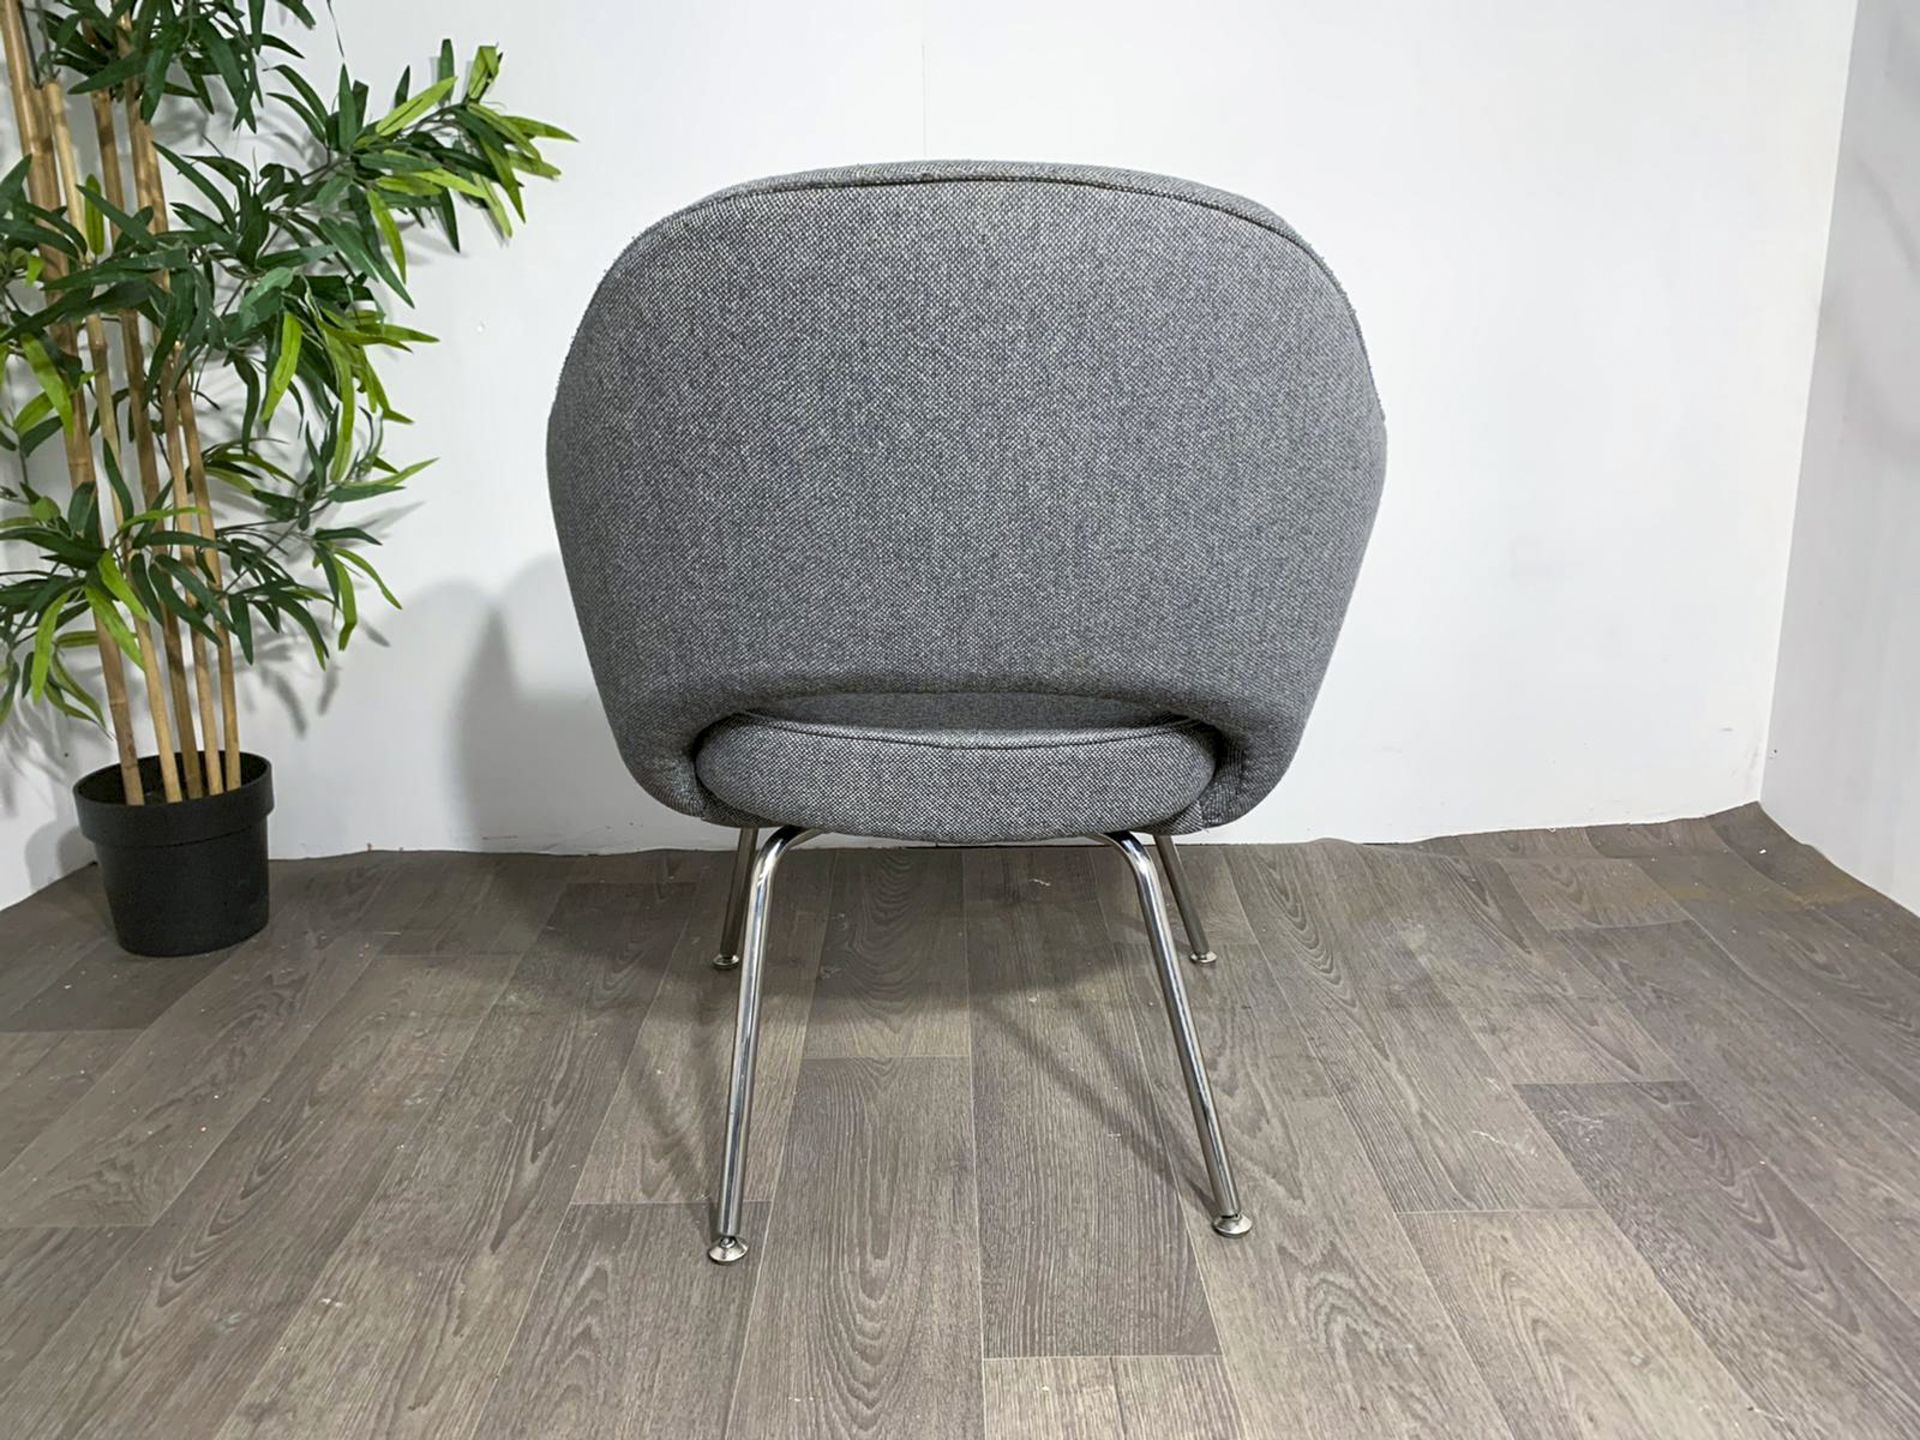 Grey Fabric Commercial Grade Chair with Chrome Legs x2 - Image 2 of 8